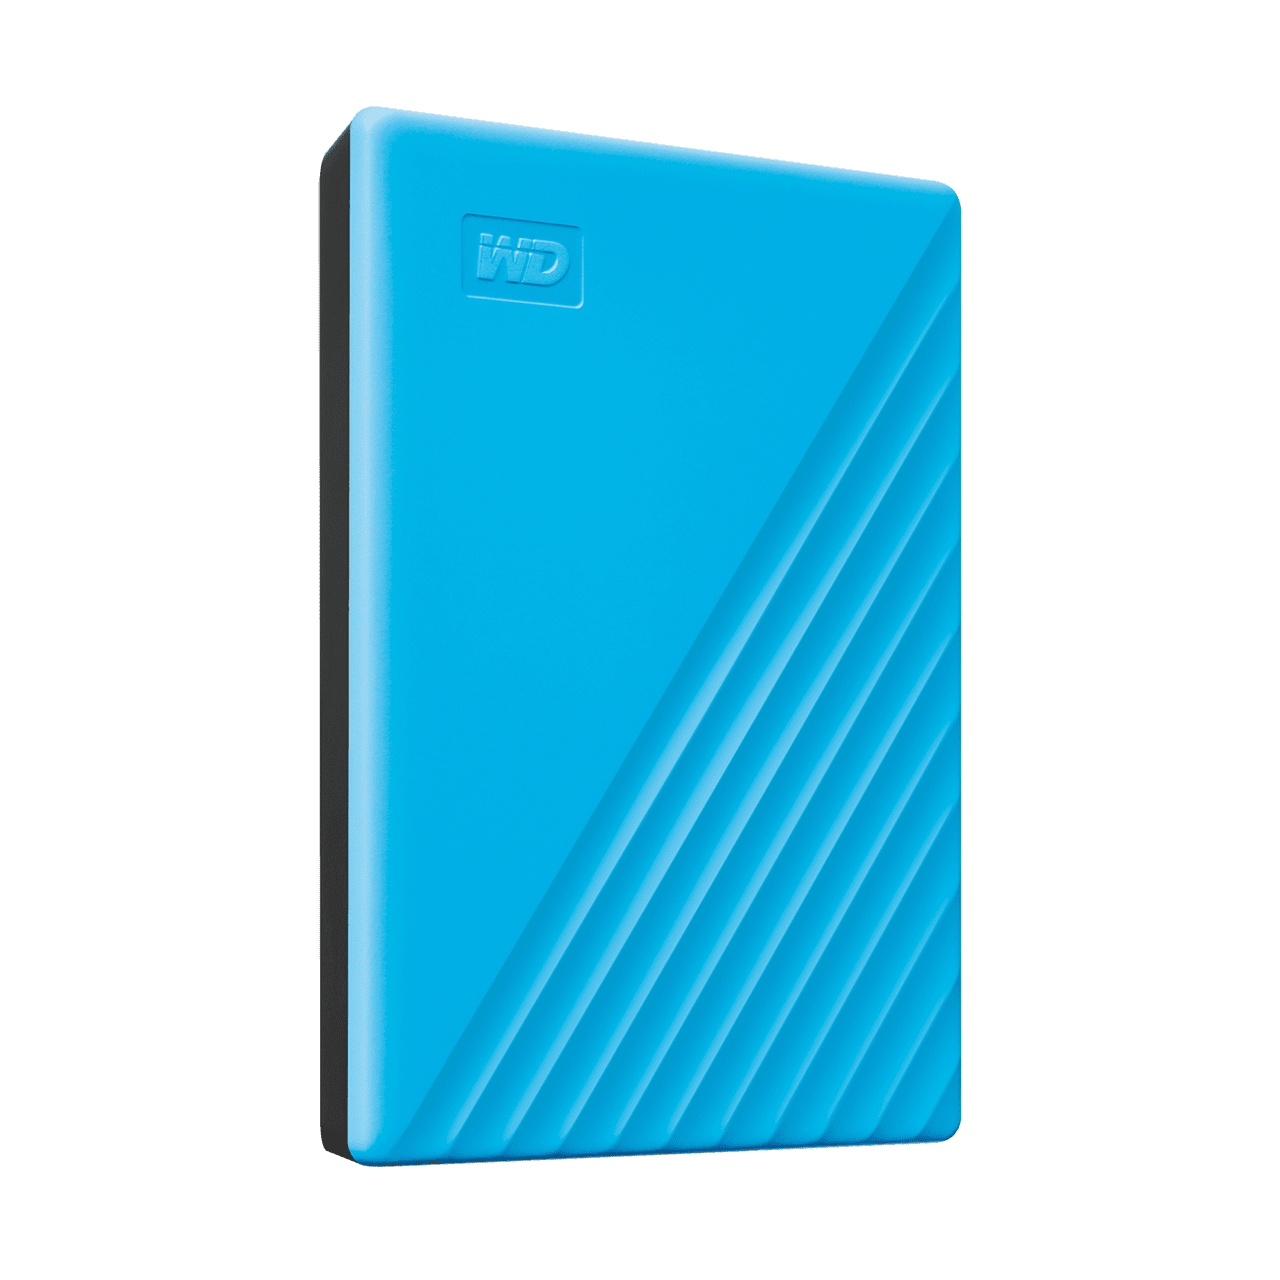 WD Western Digital My Passport 2TB (Blue) Slim Portable External Hard Disk USB 3.0 With WD Backup Software & Password Protection